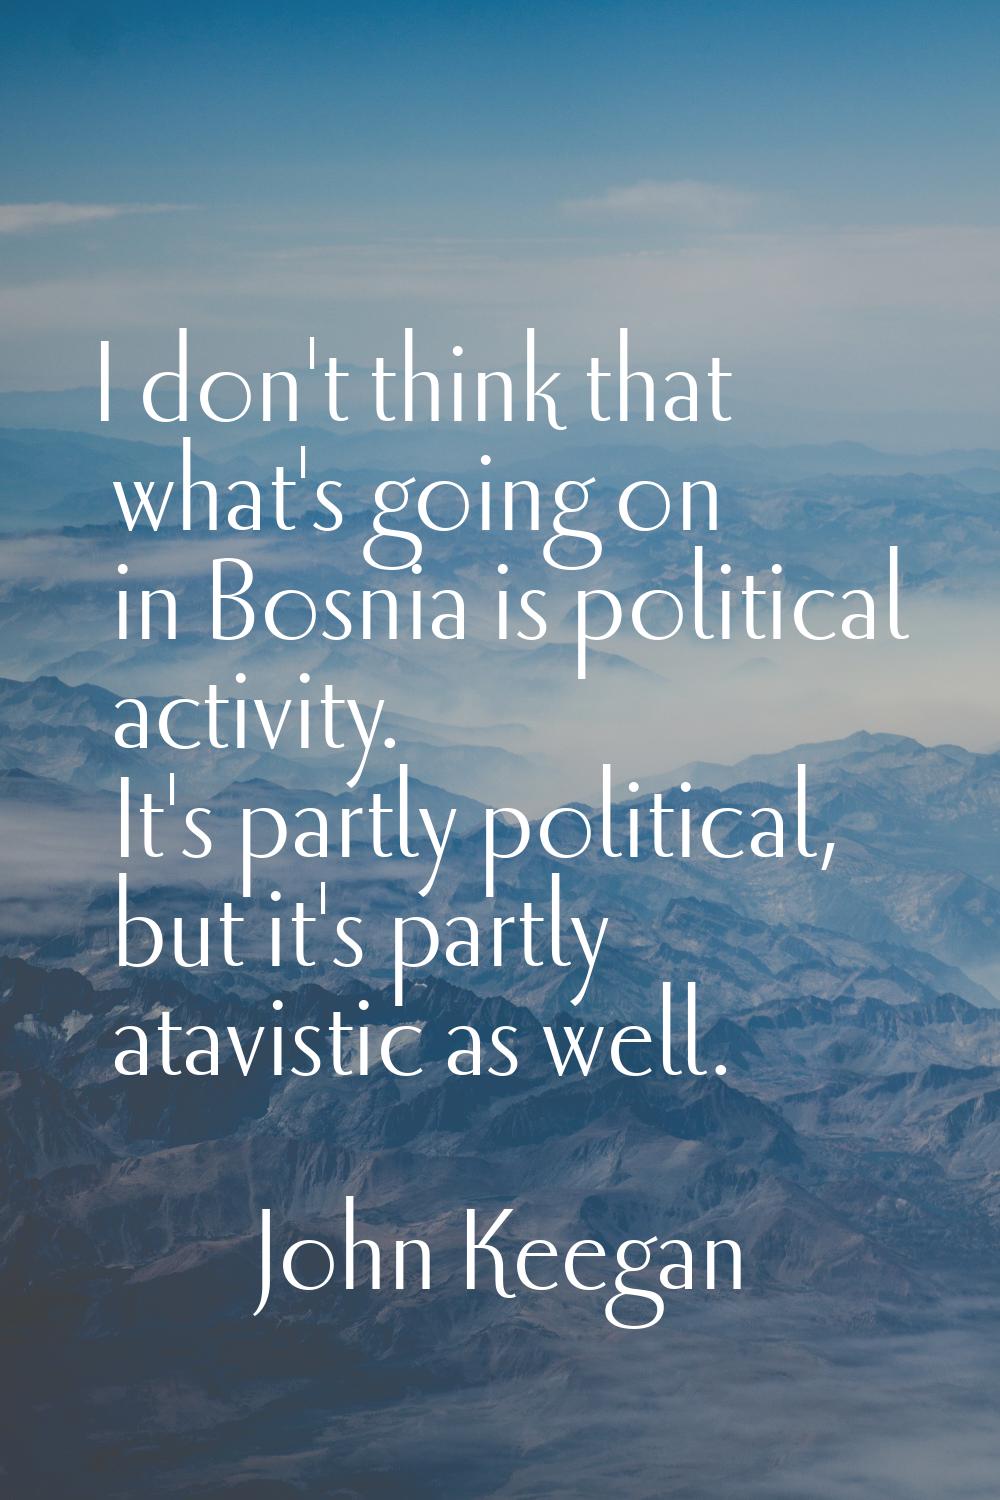 I don't think that what's going on in Bosnia is political activity. It's partly political, but it's